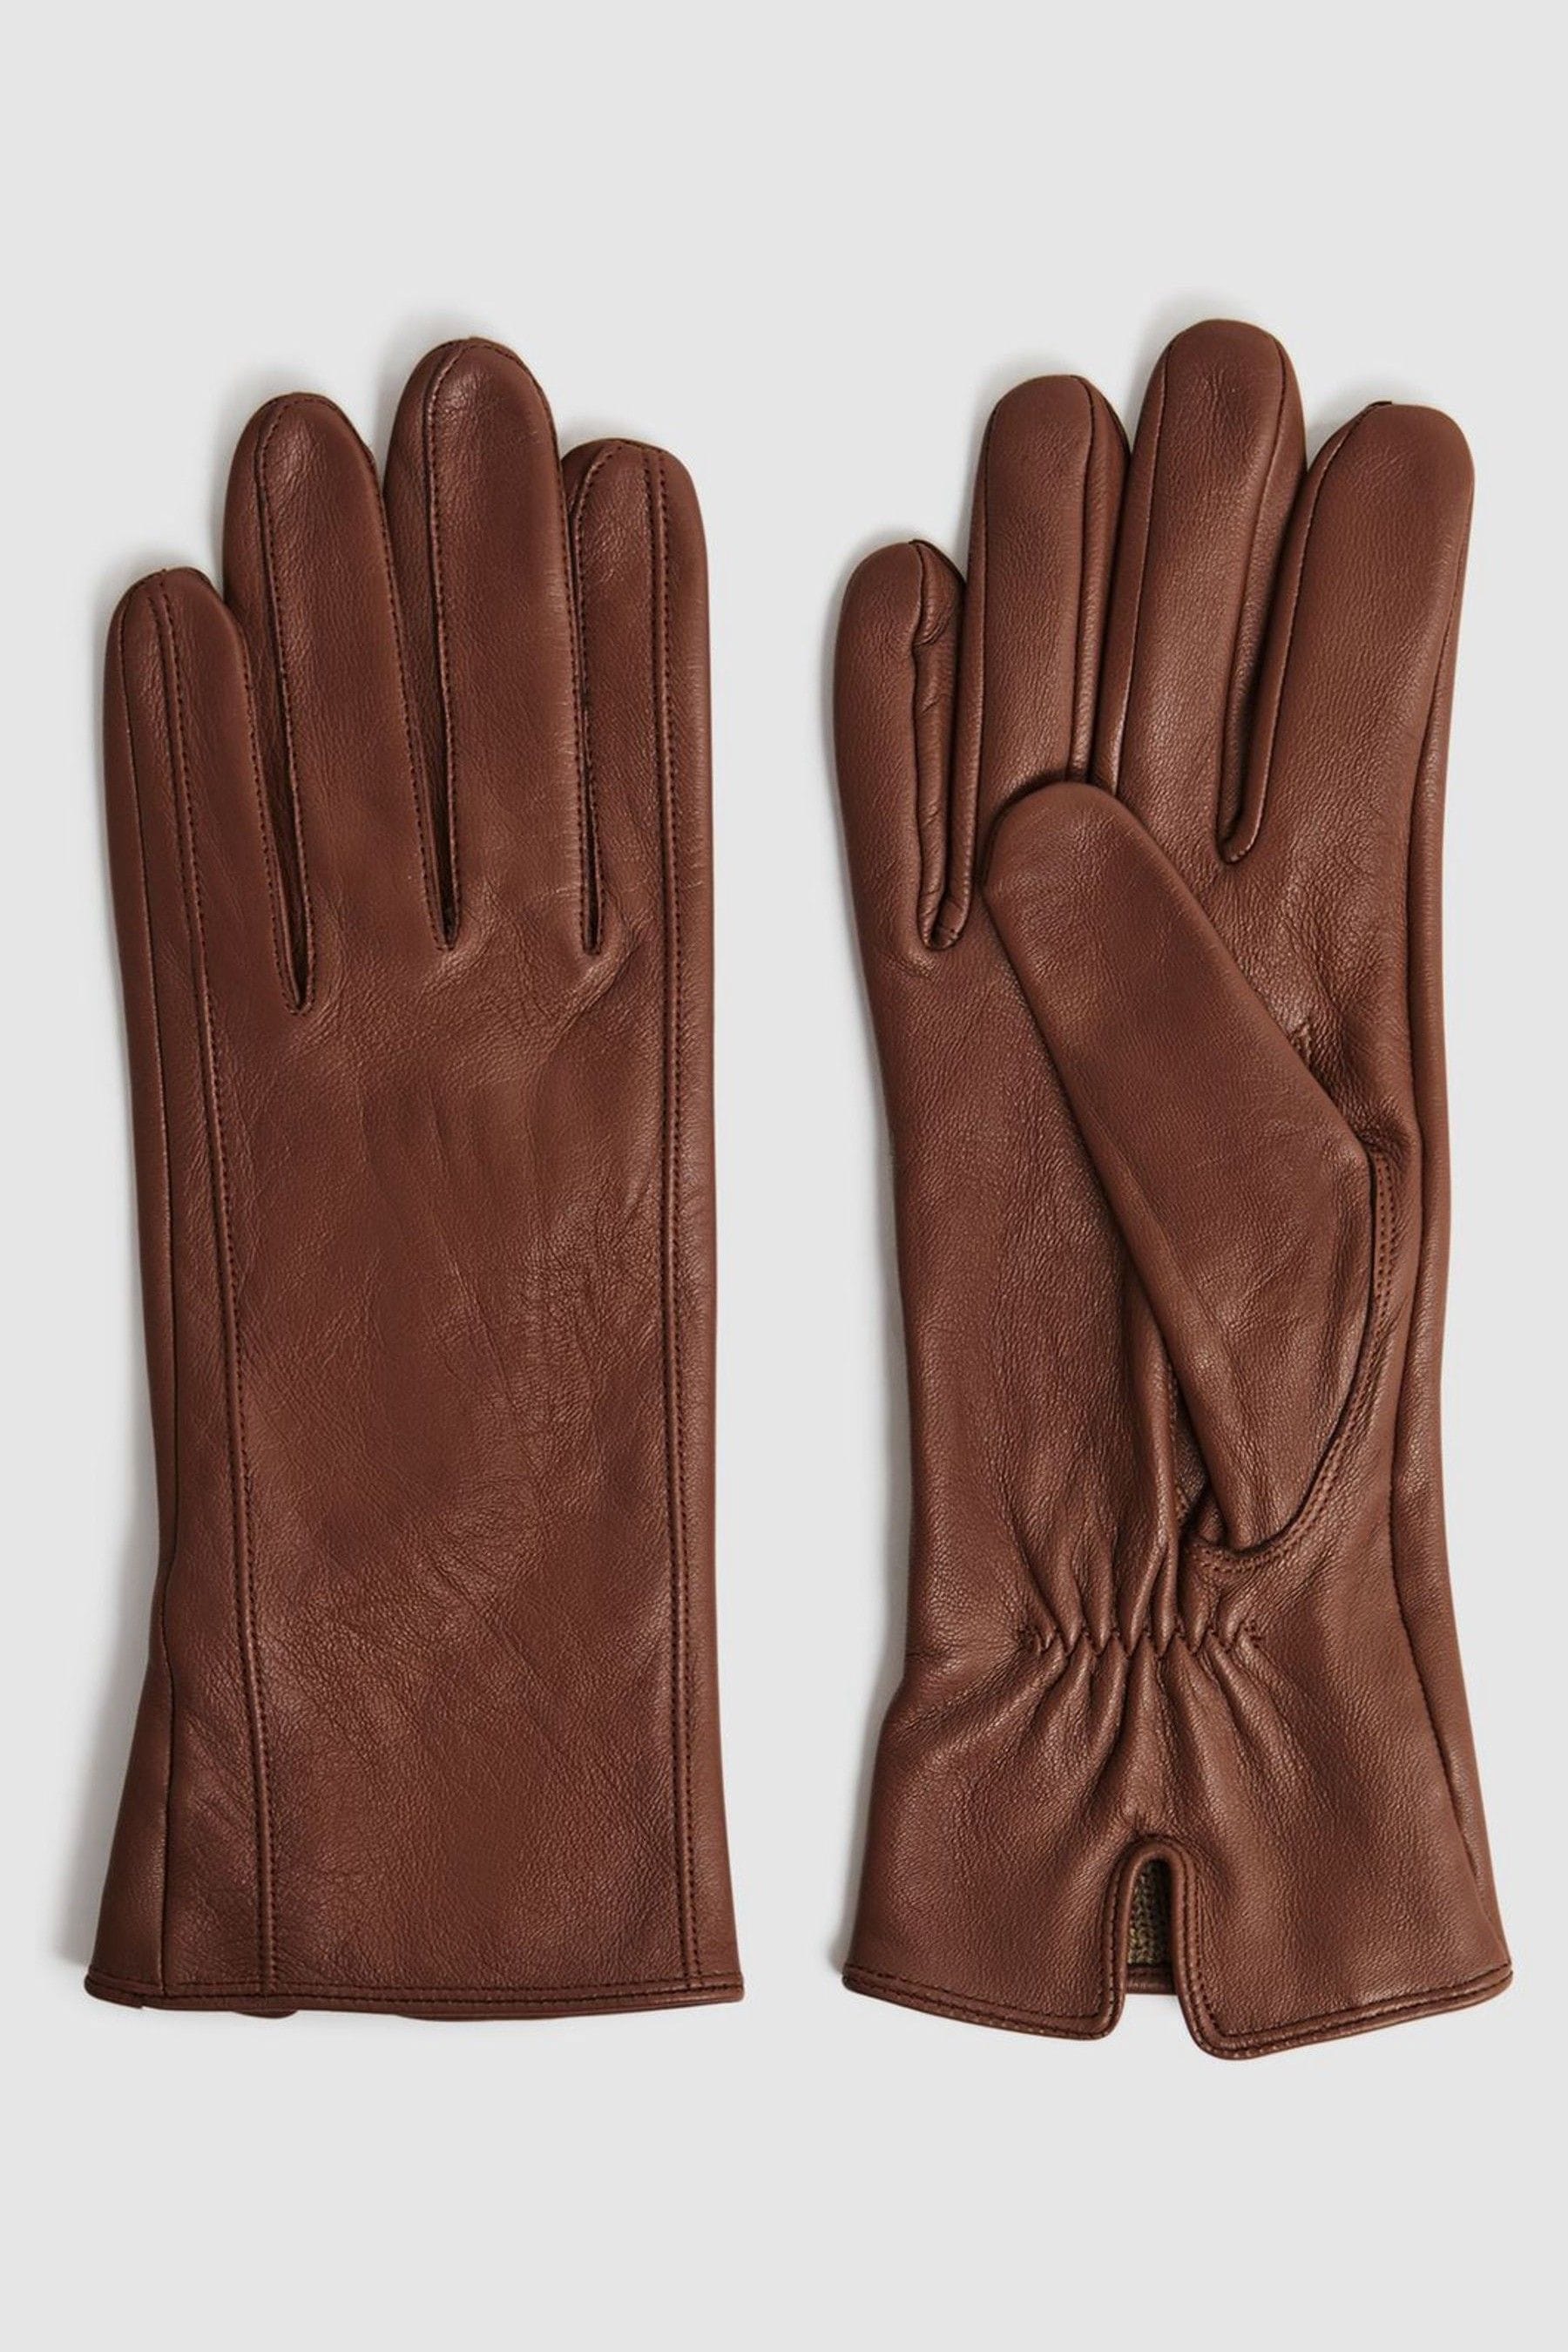 Reiss Giselle - Tan Leather Ruched Gloves, Uk M-l